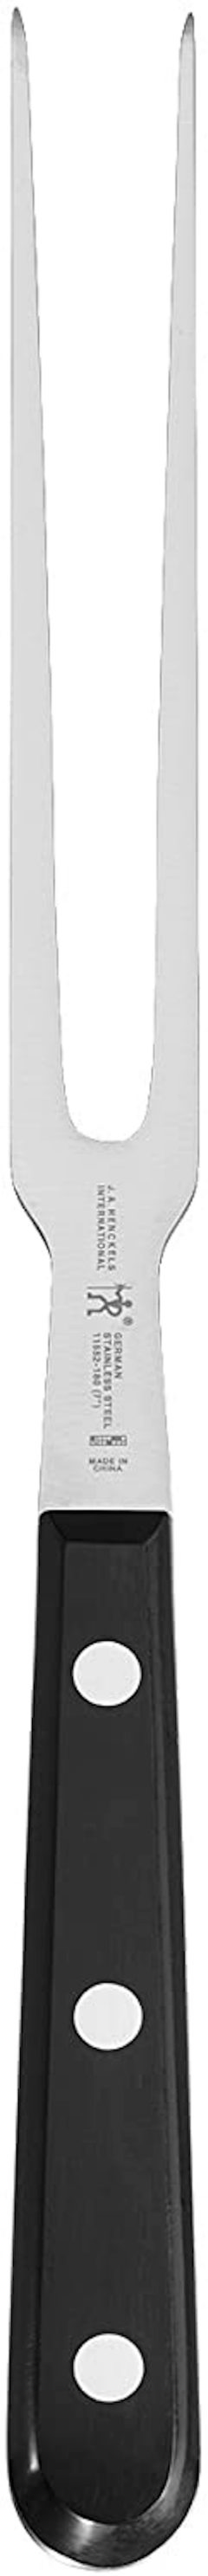 J.A. Henckels Classic Stainless Steel 11.4-Inch Meat Fork